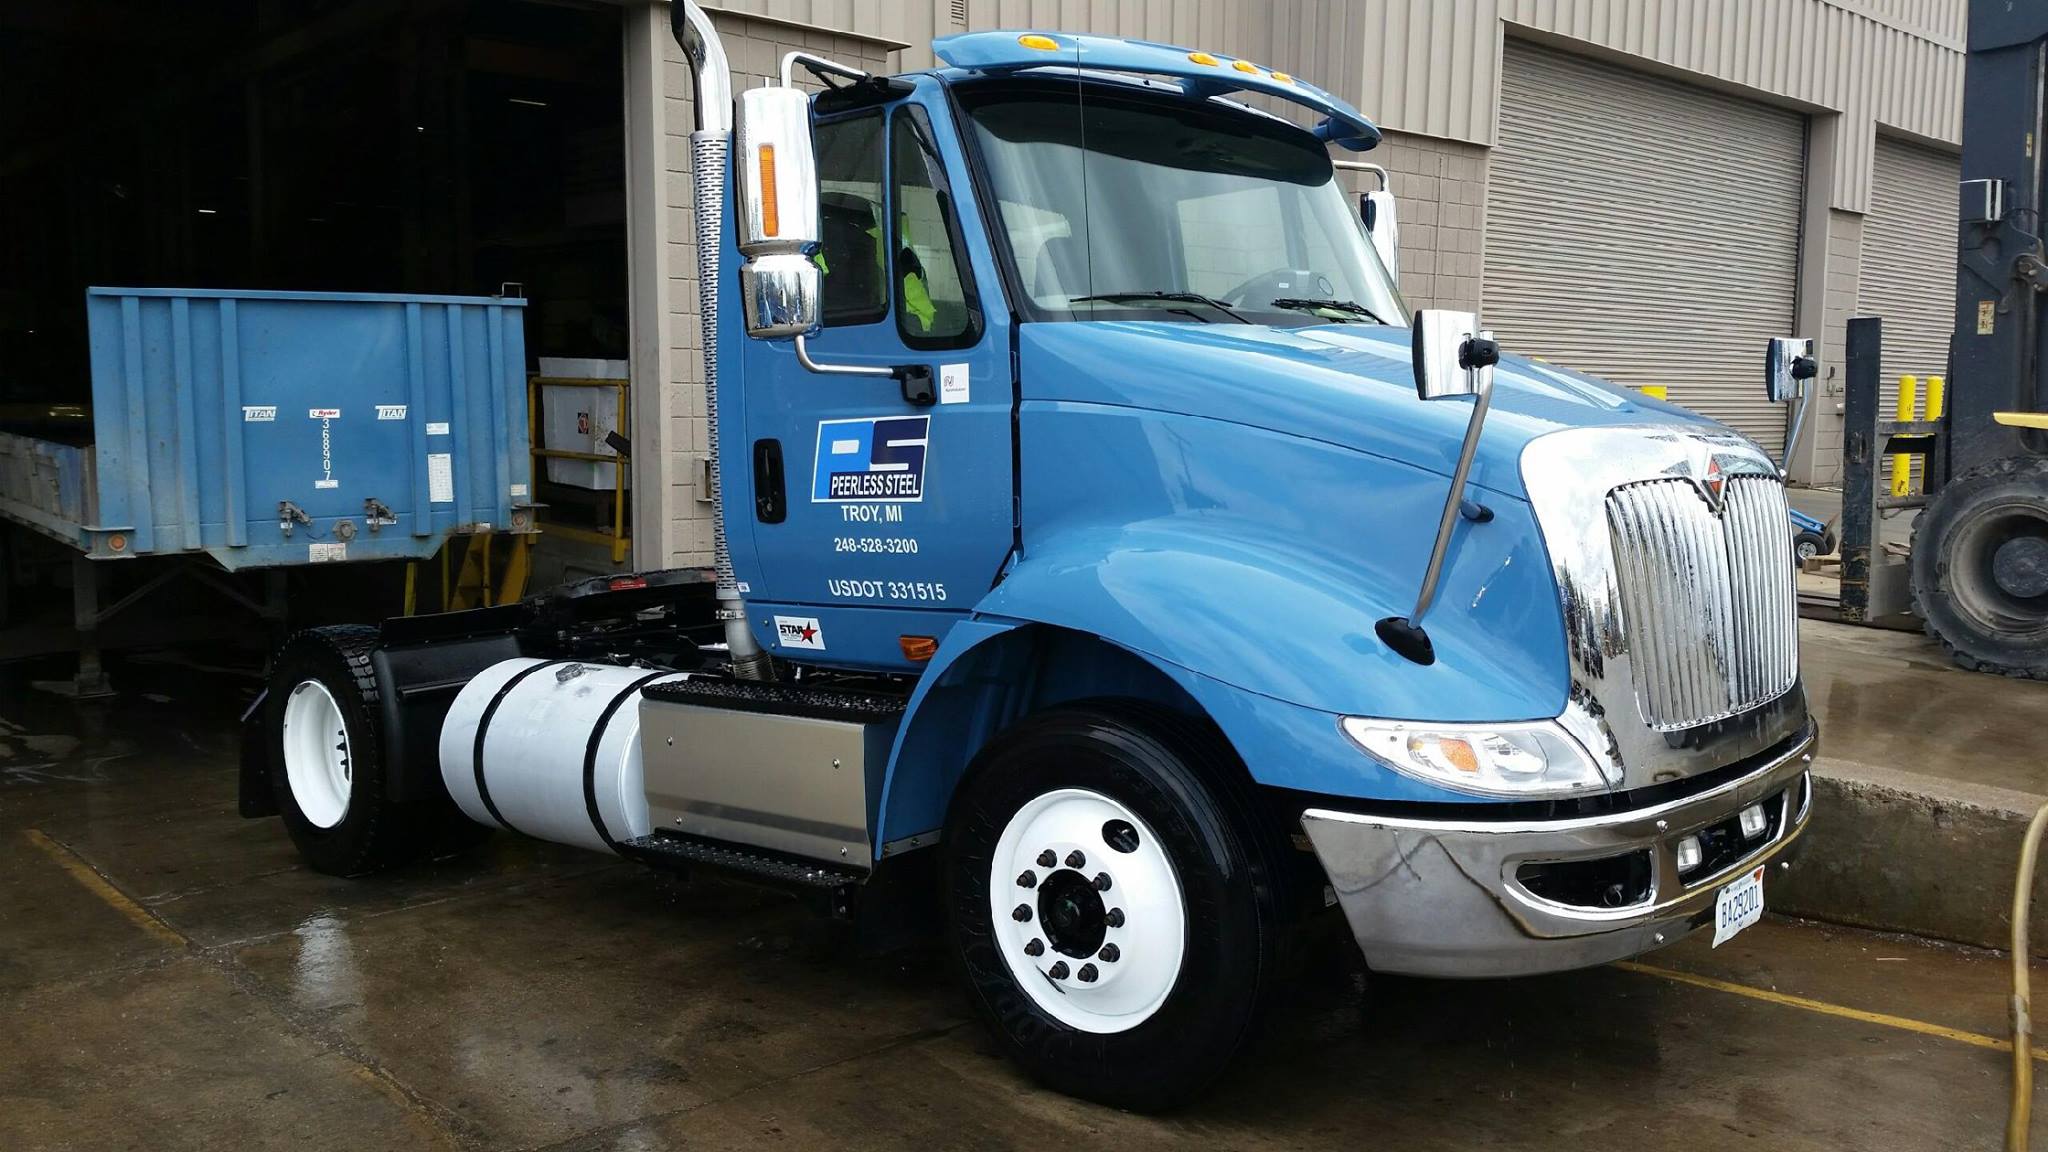 After Semi Truck & Fleet Washing_United Mobile Power Wash & Pressure Washing Services_Commercial_Southfield Michigan_24